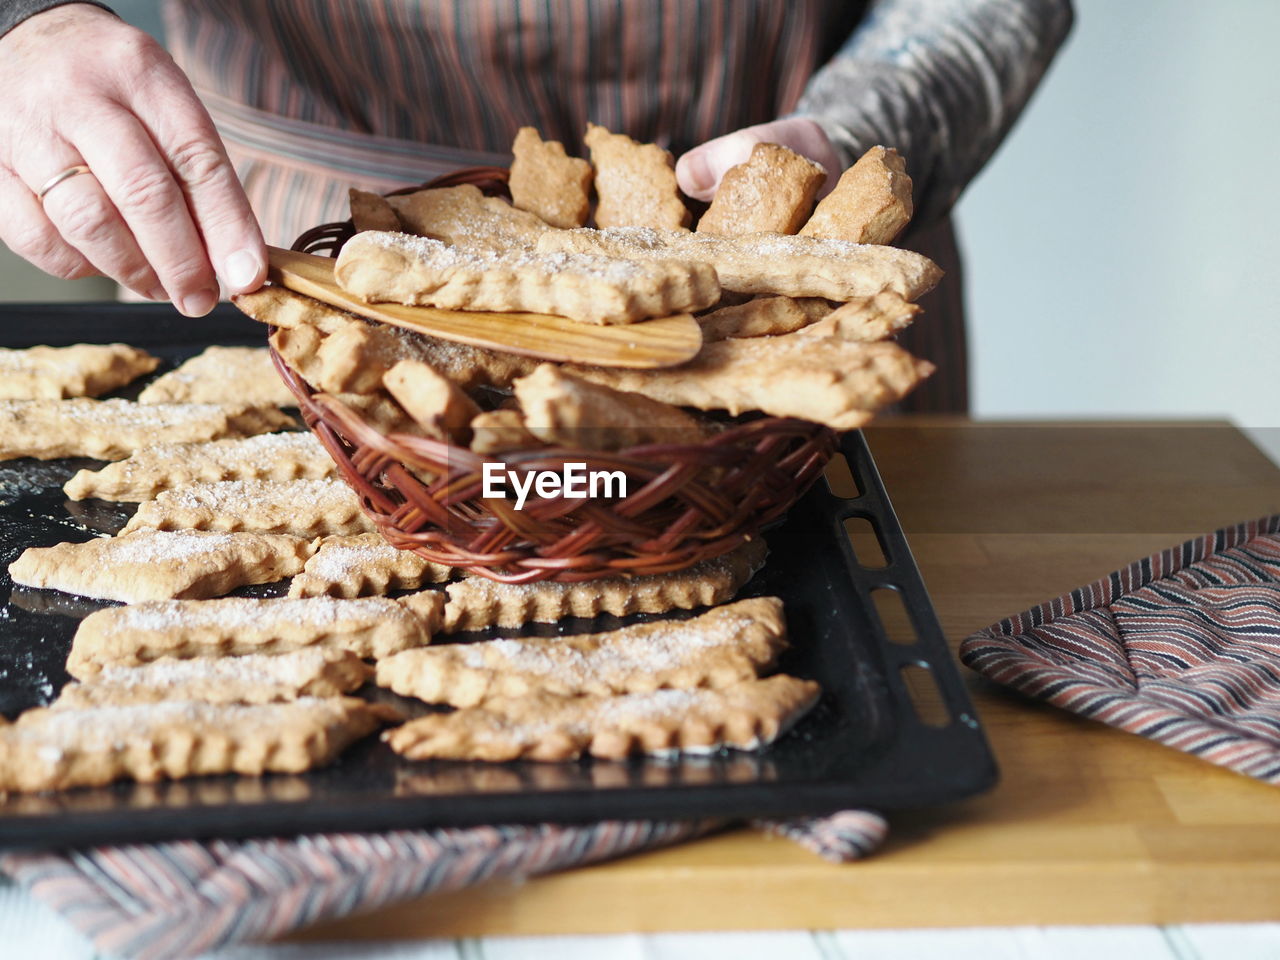  the hands of an elderly woman remove the prepared freshly baked cookies from the baking sheet 